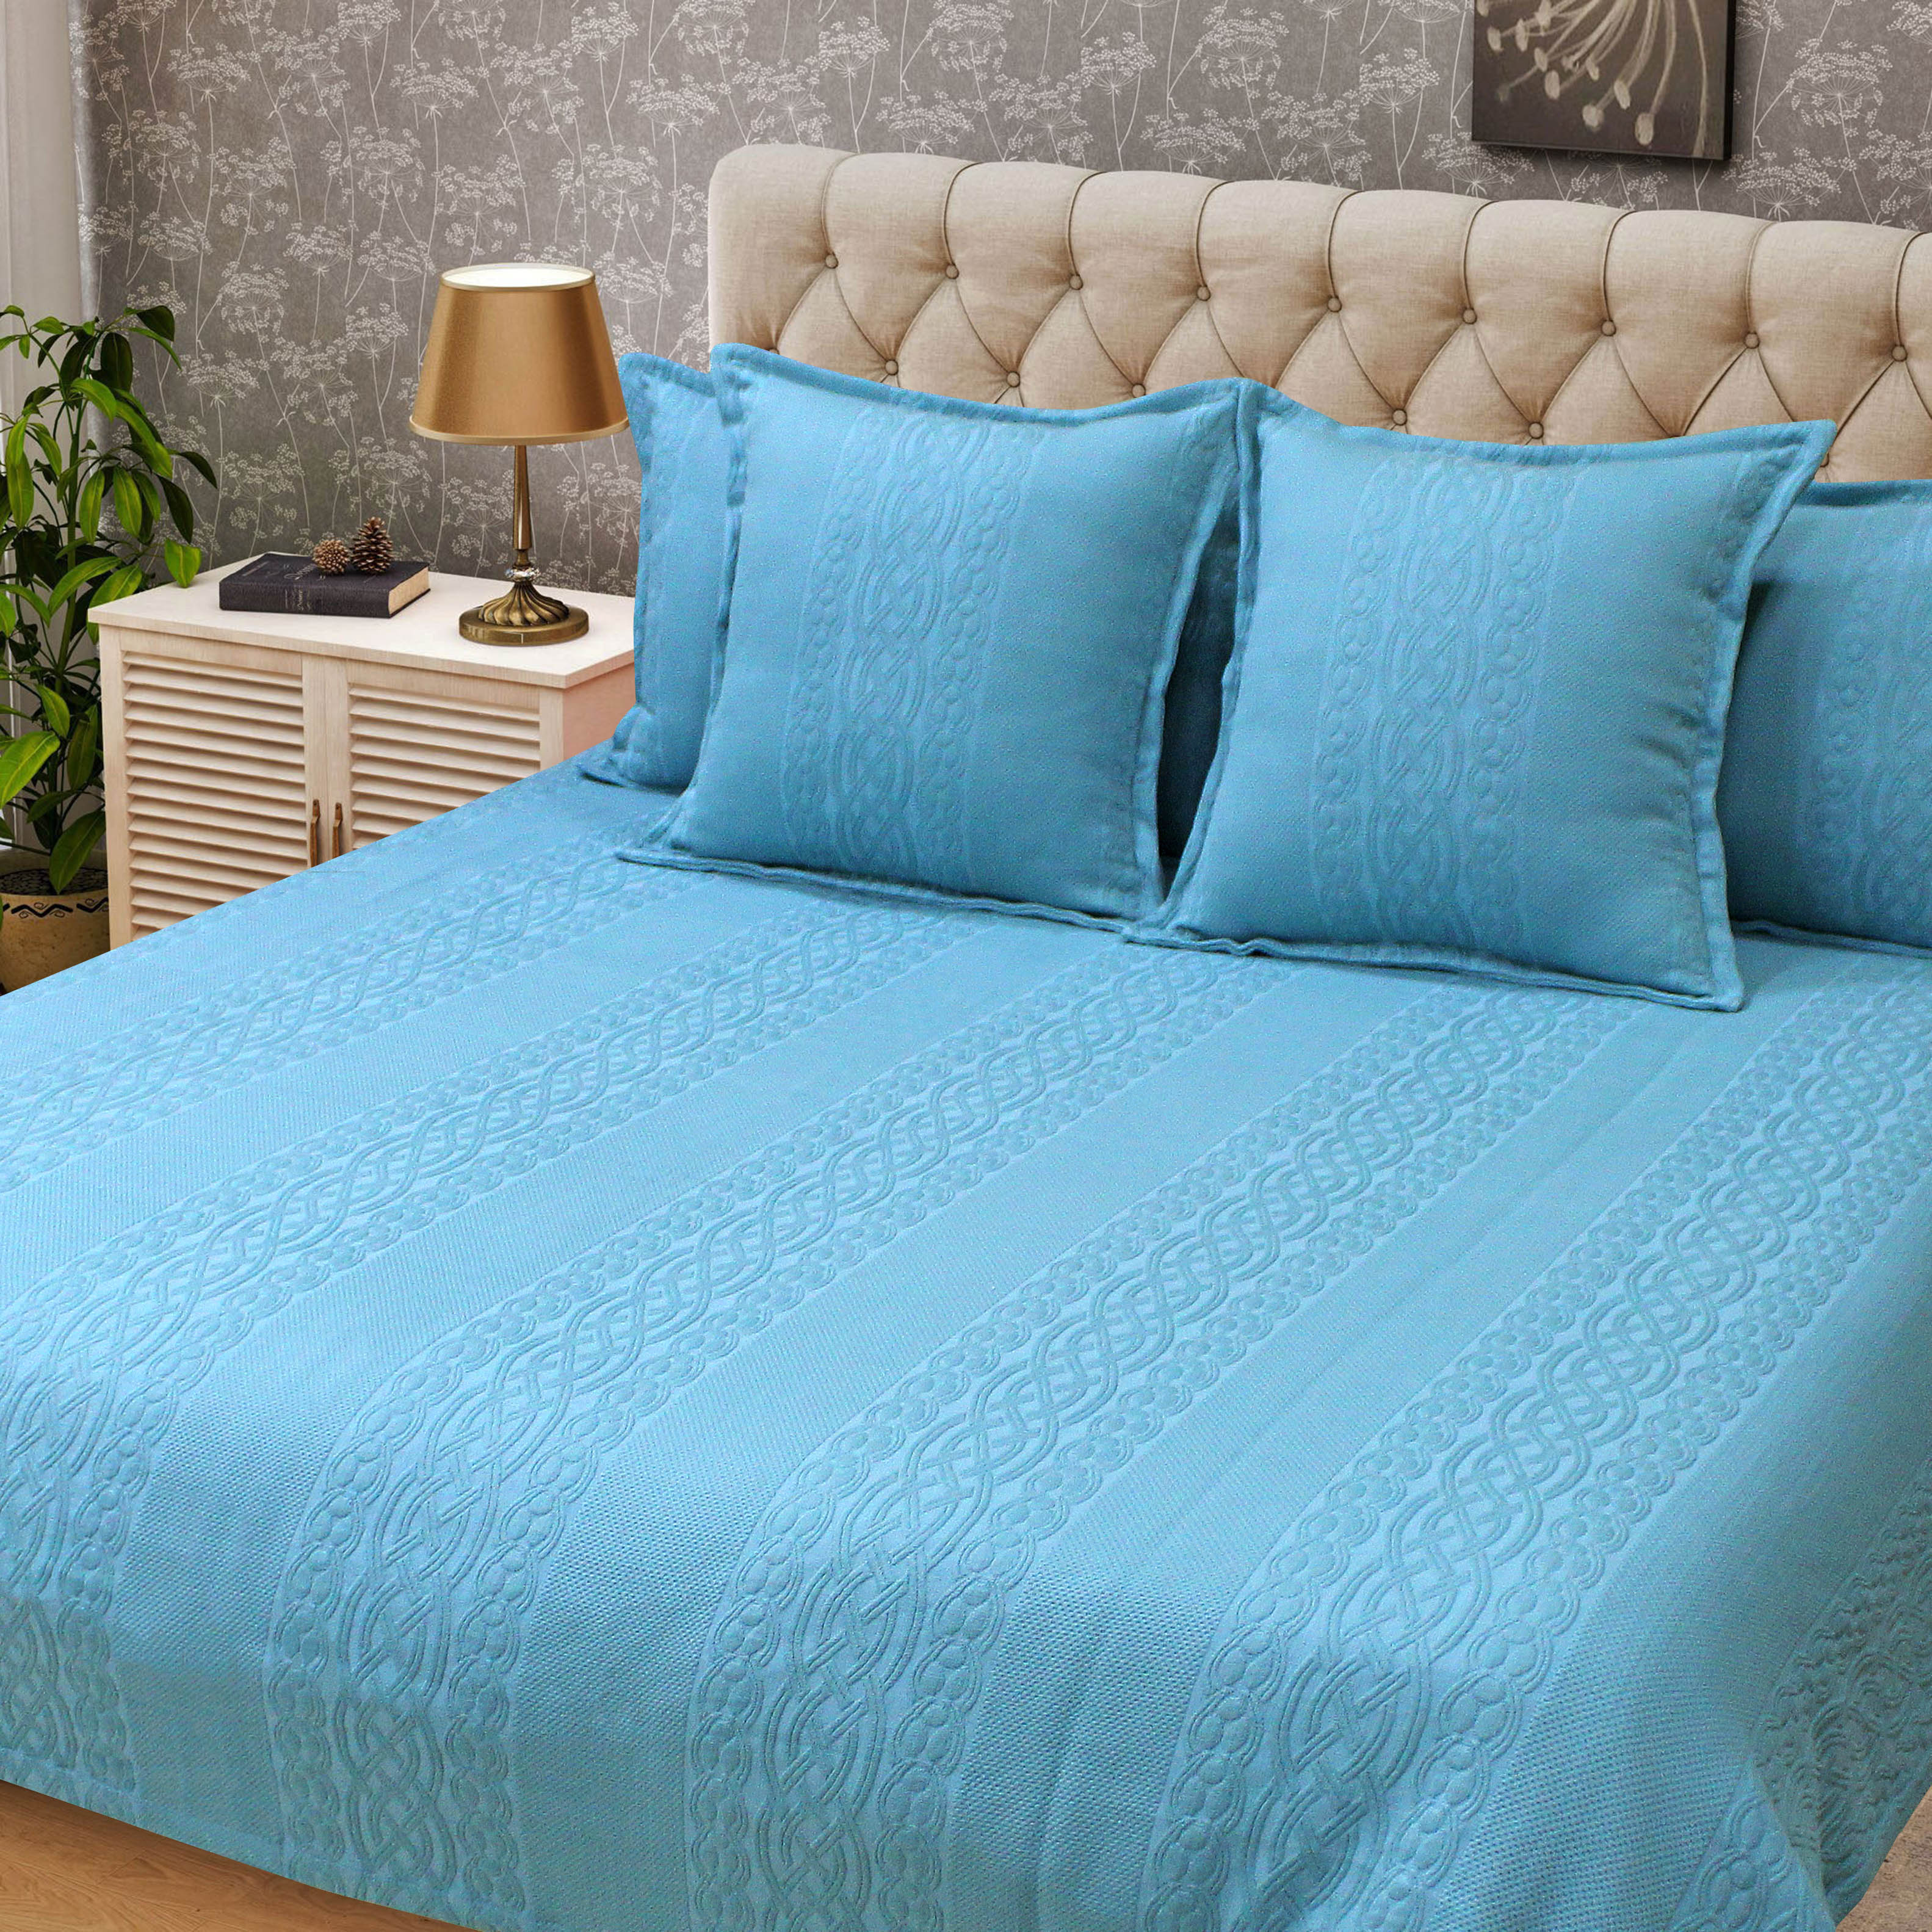 Bed Sheet Exporter India